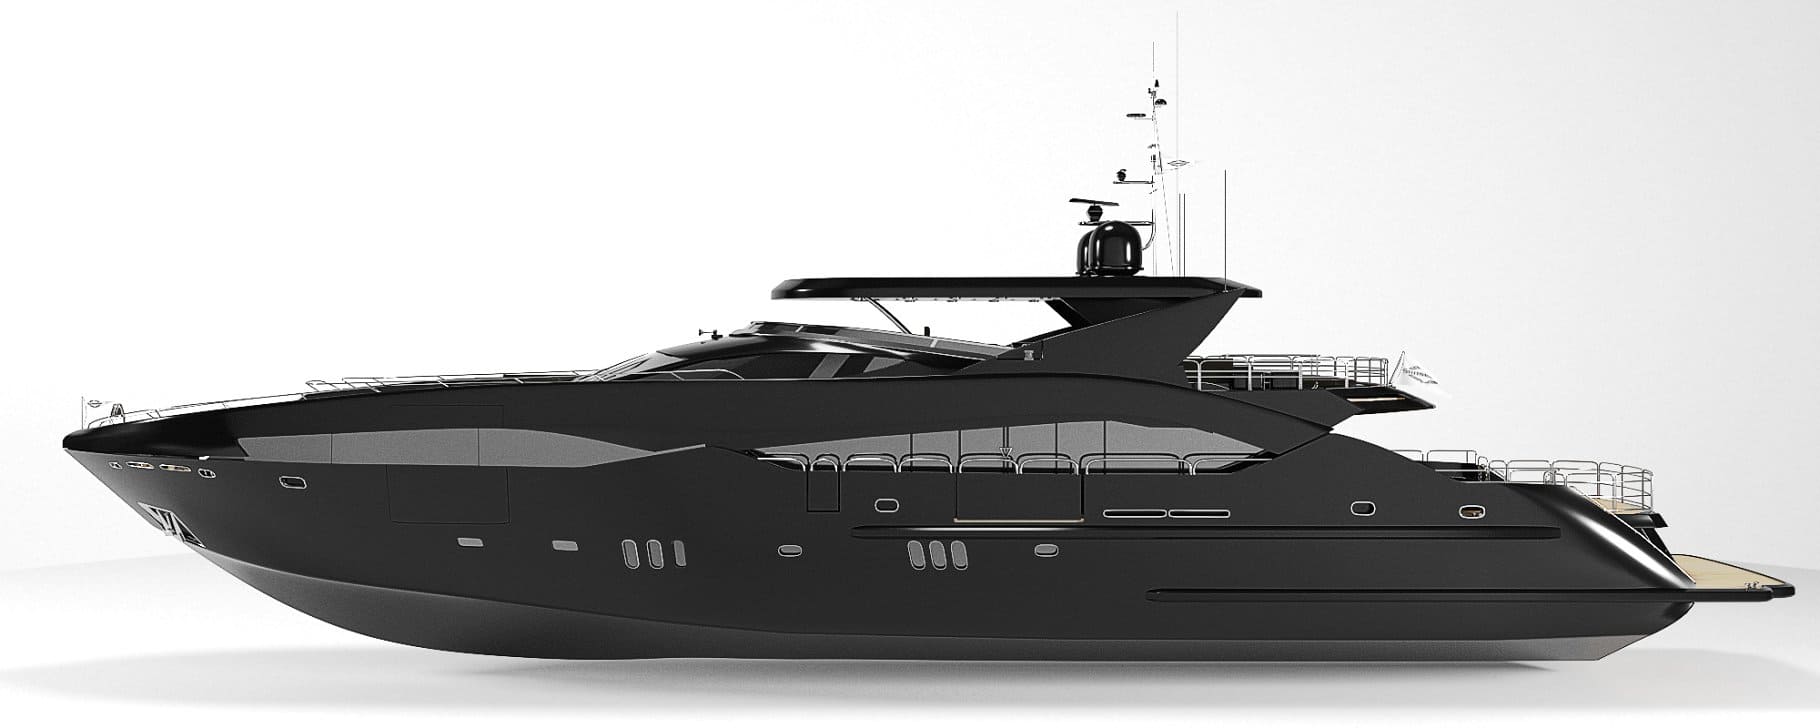 Side view of the gray model of the Sunseeker predator 130 Superyacht.